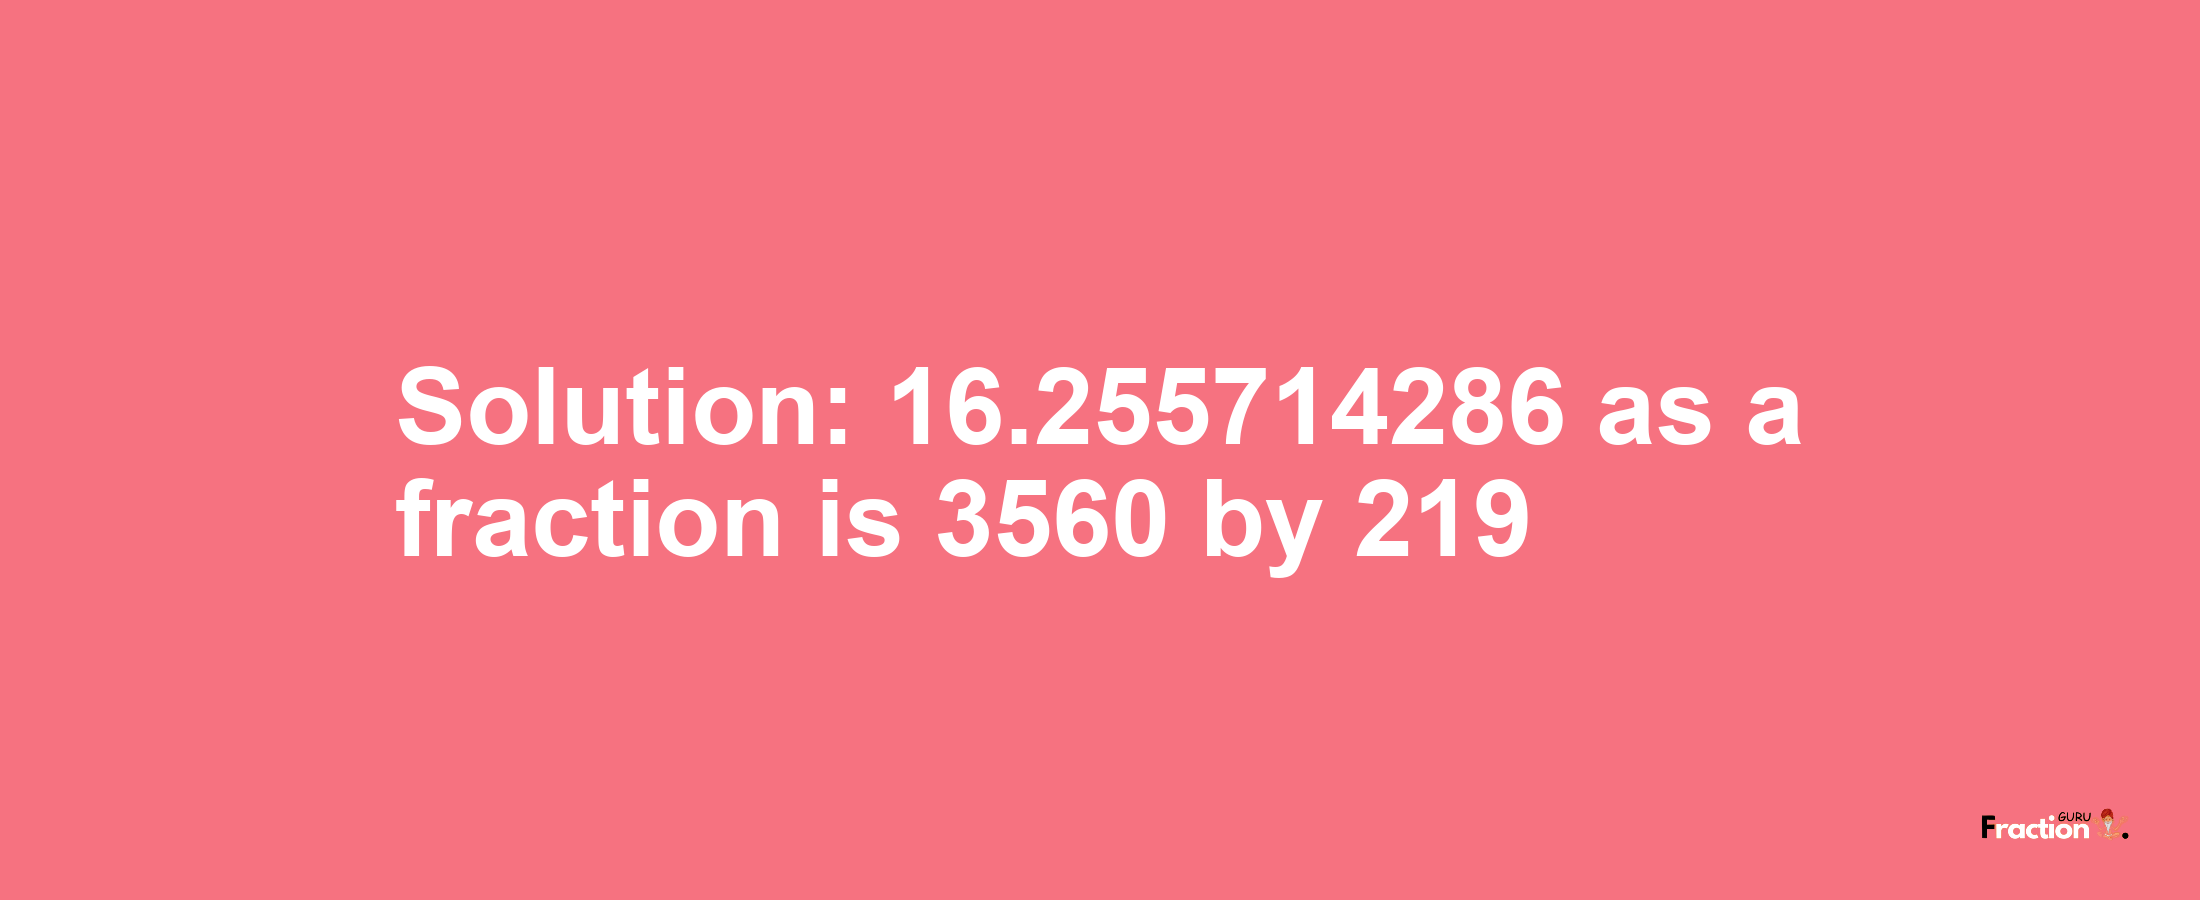 Solution:16.255714286 as a fraction is 3560/219